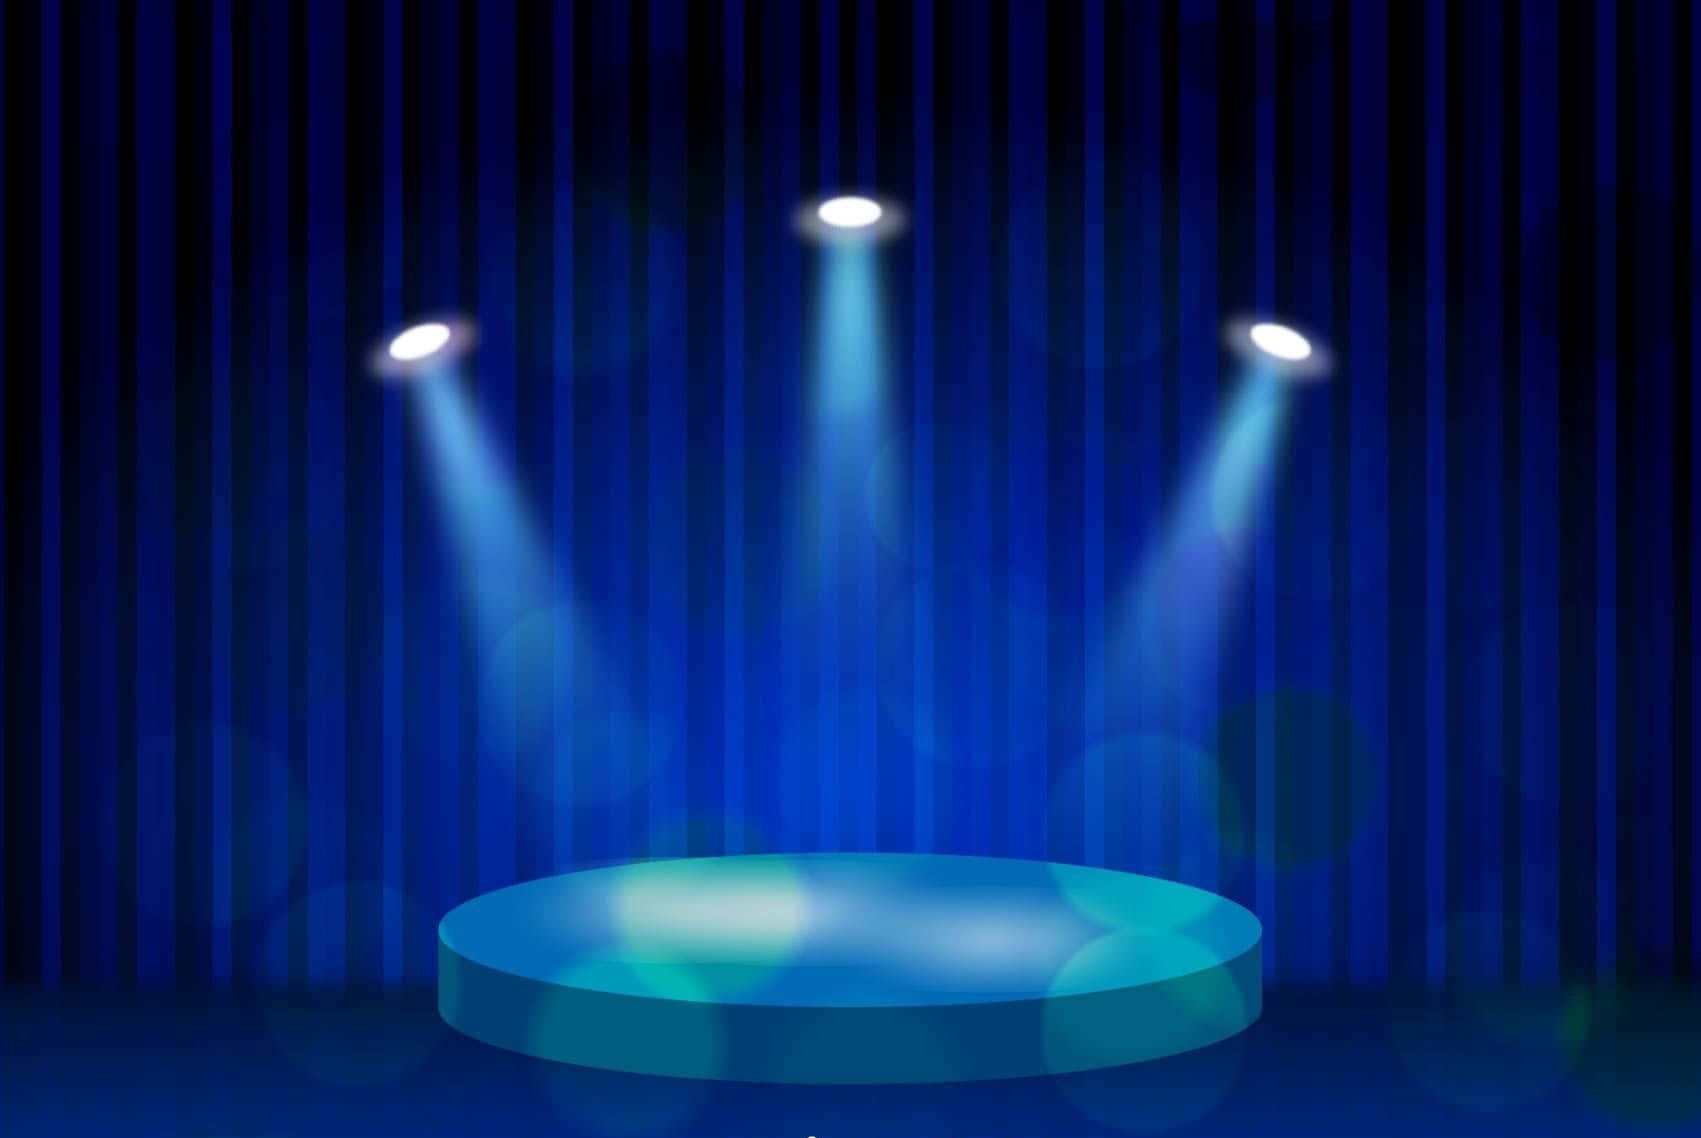 Stage With Spotlights On The Stage Vector